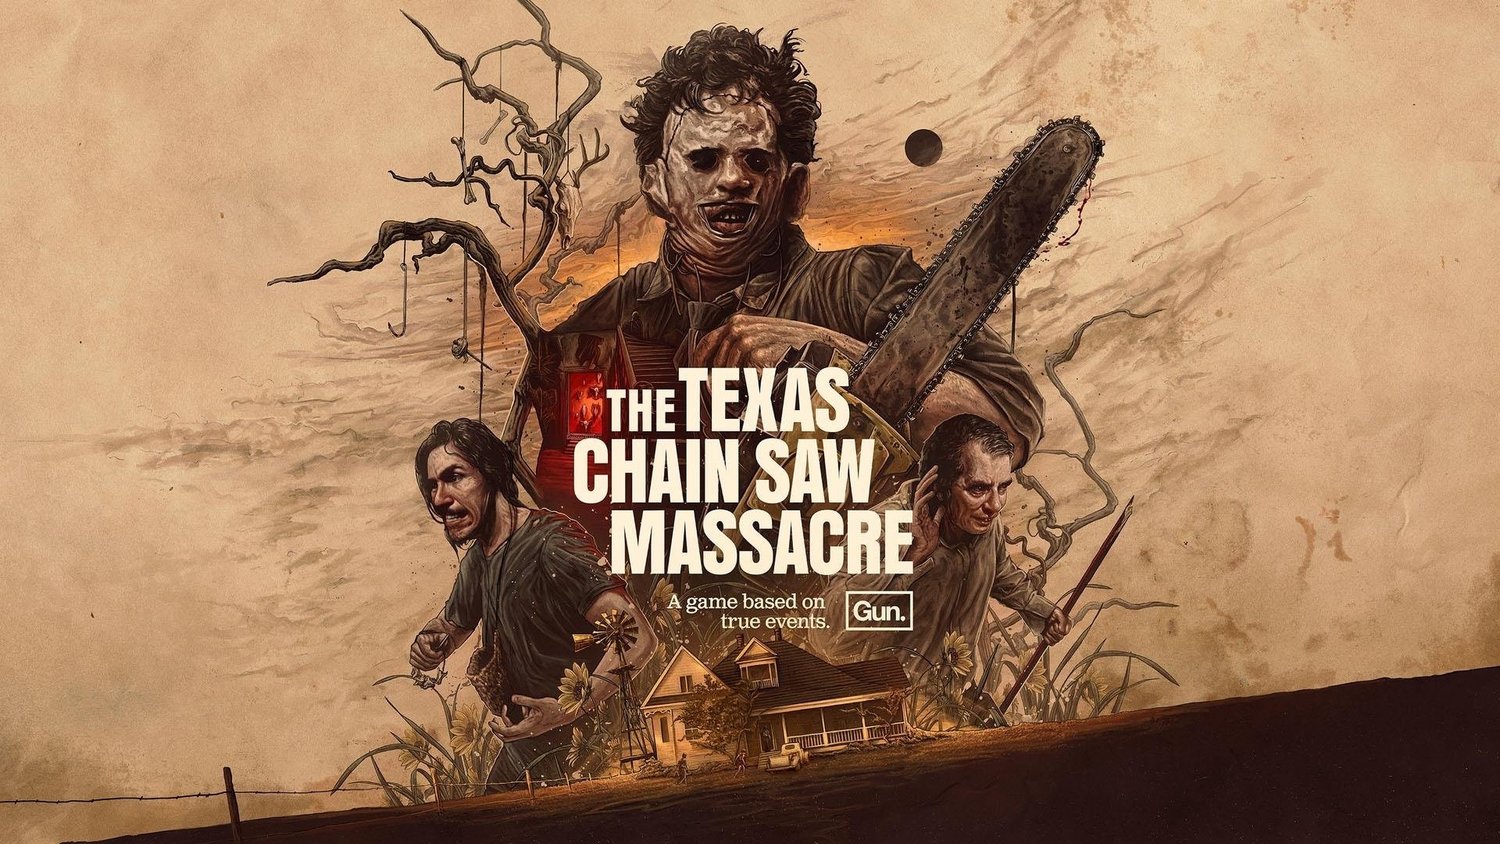 THE TEXAS CHAINSAW MASSACRE Video Game Trailer Shows Off Impressive Recreated Film Locations — GeekTyrant the texas chainsaw massacre video game trailer shows off impressive recreated film locations